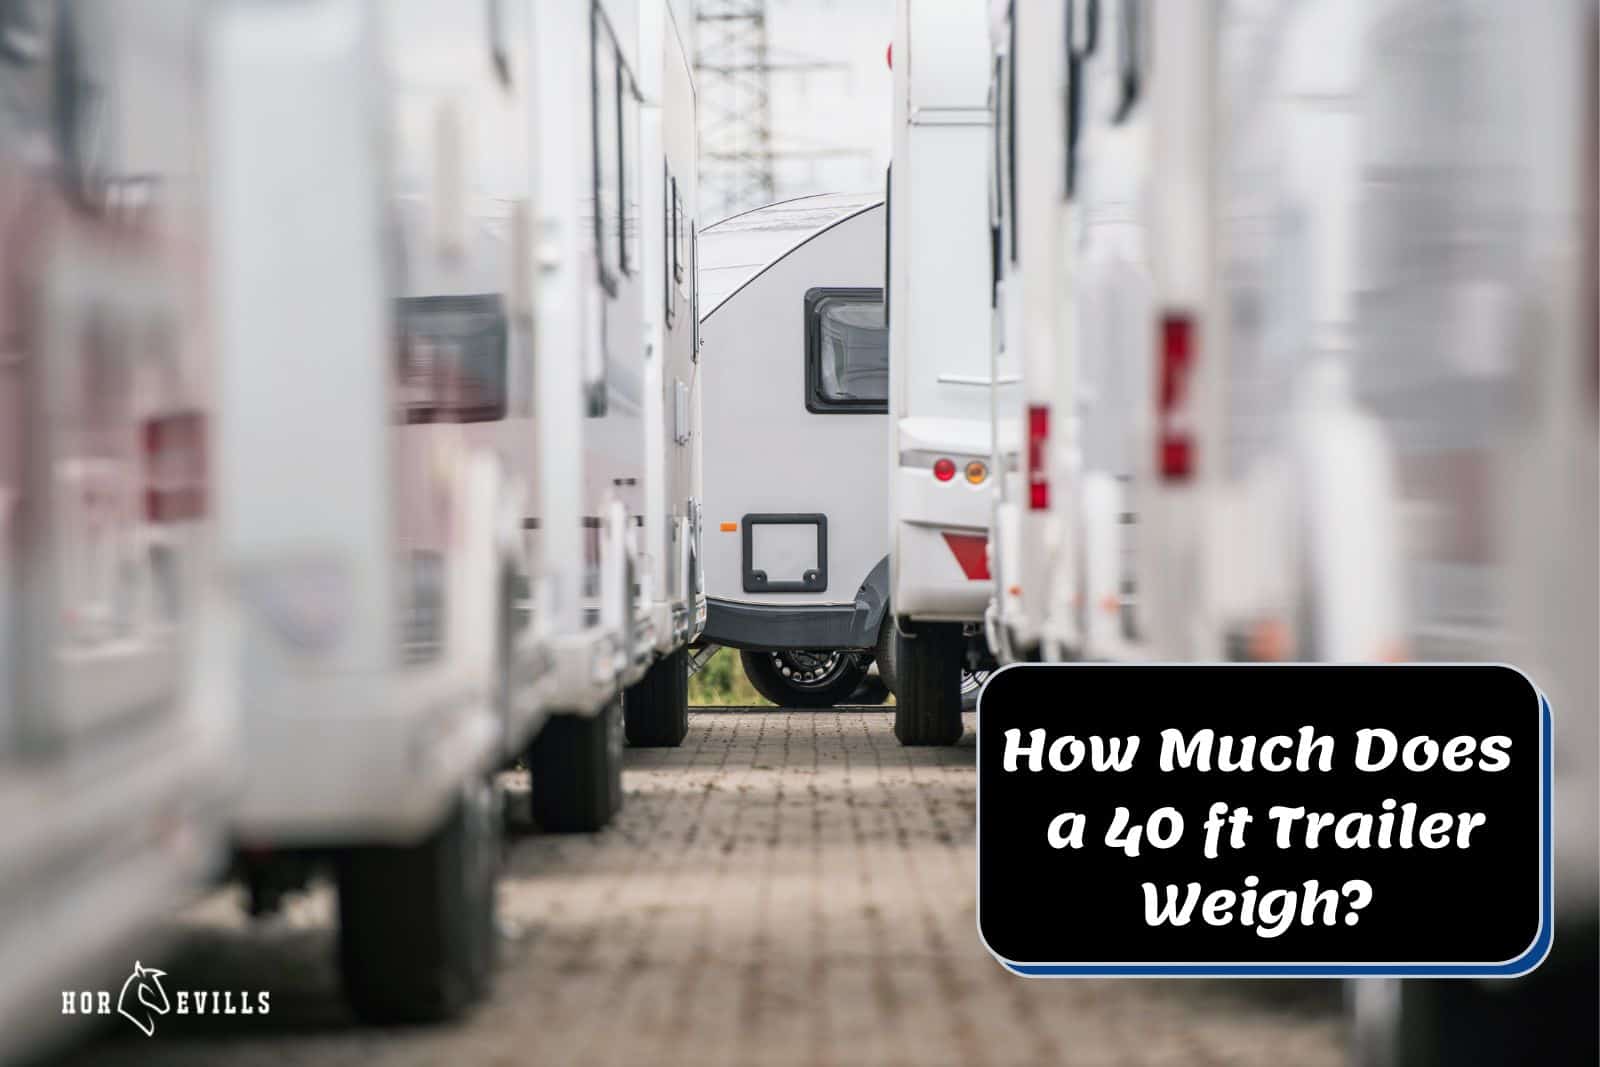 horse trailers parked beside each other (how much does a 40 ft trailer weigh)